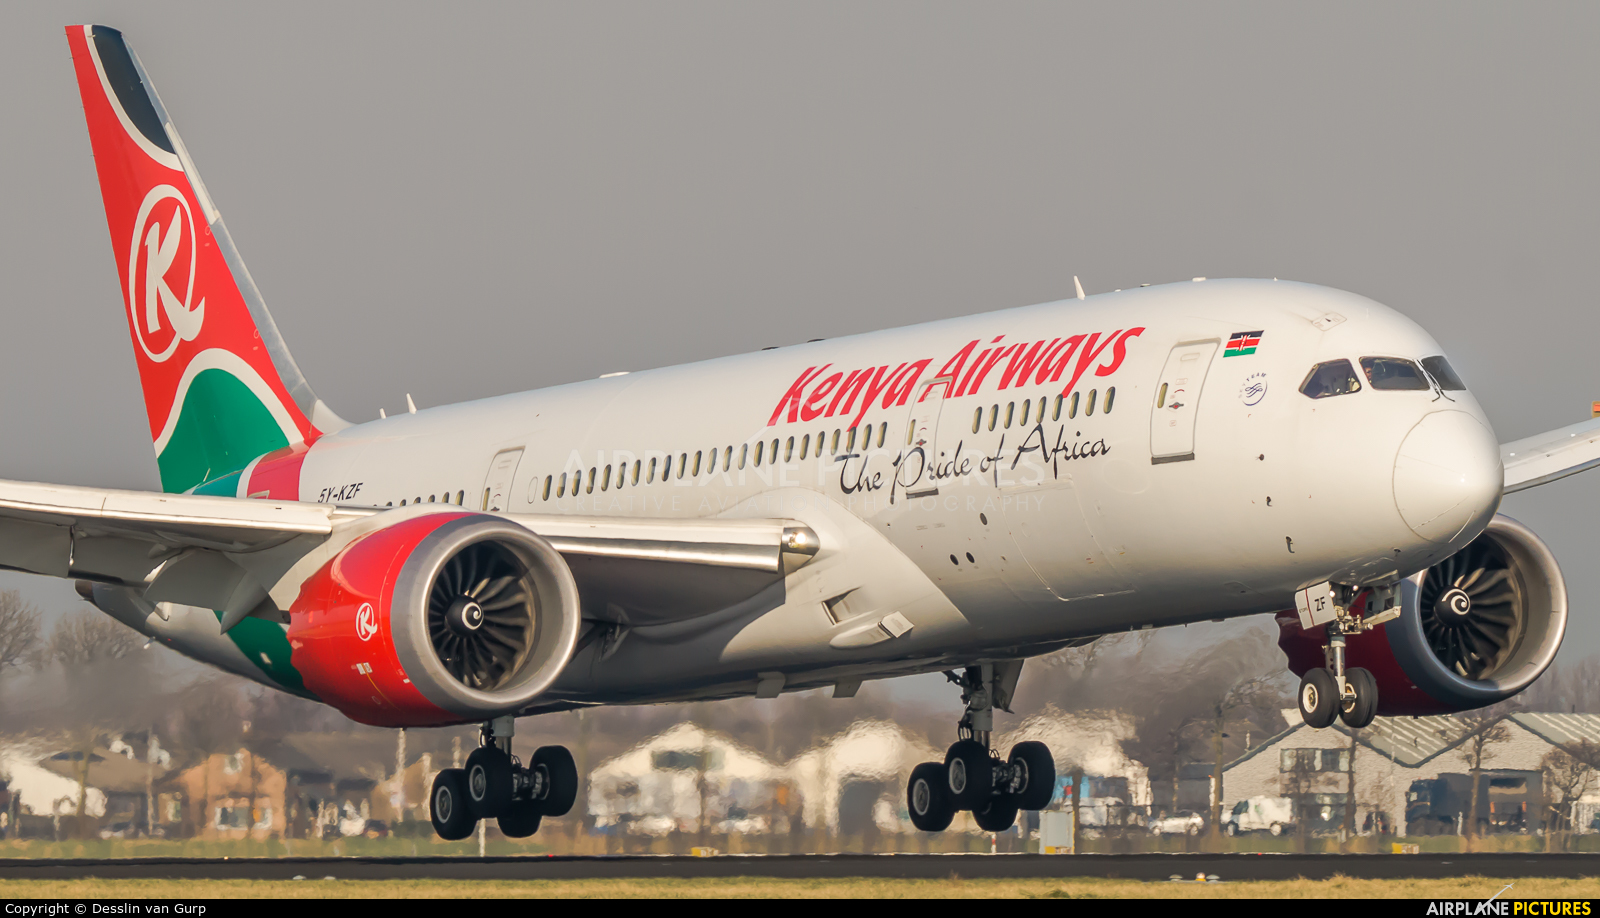 KQ Plane from Nairobi Diverted After Security Threat